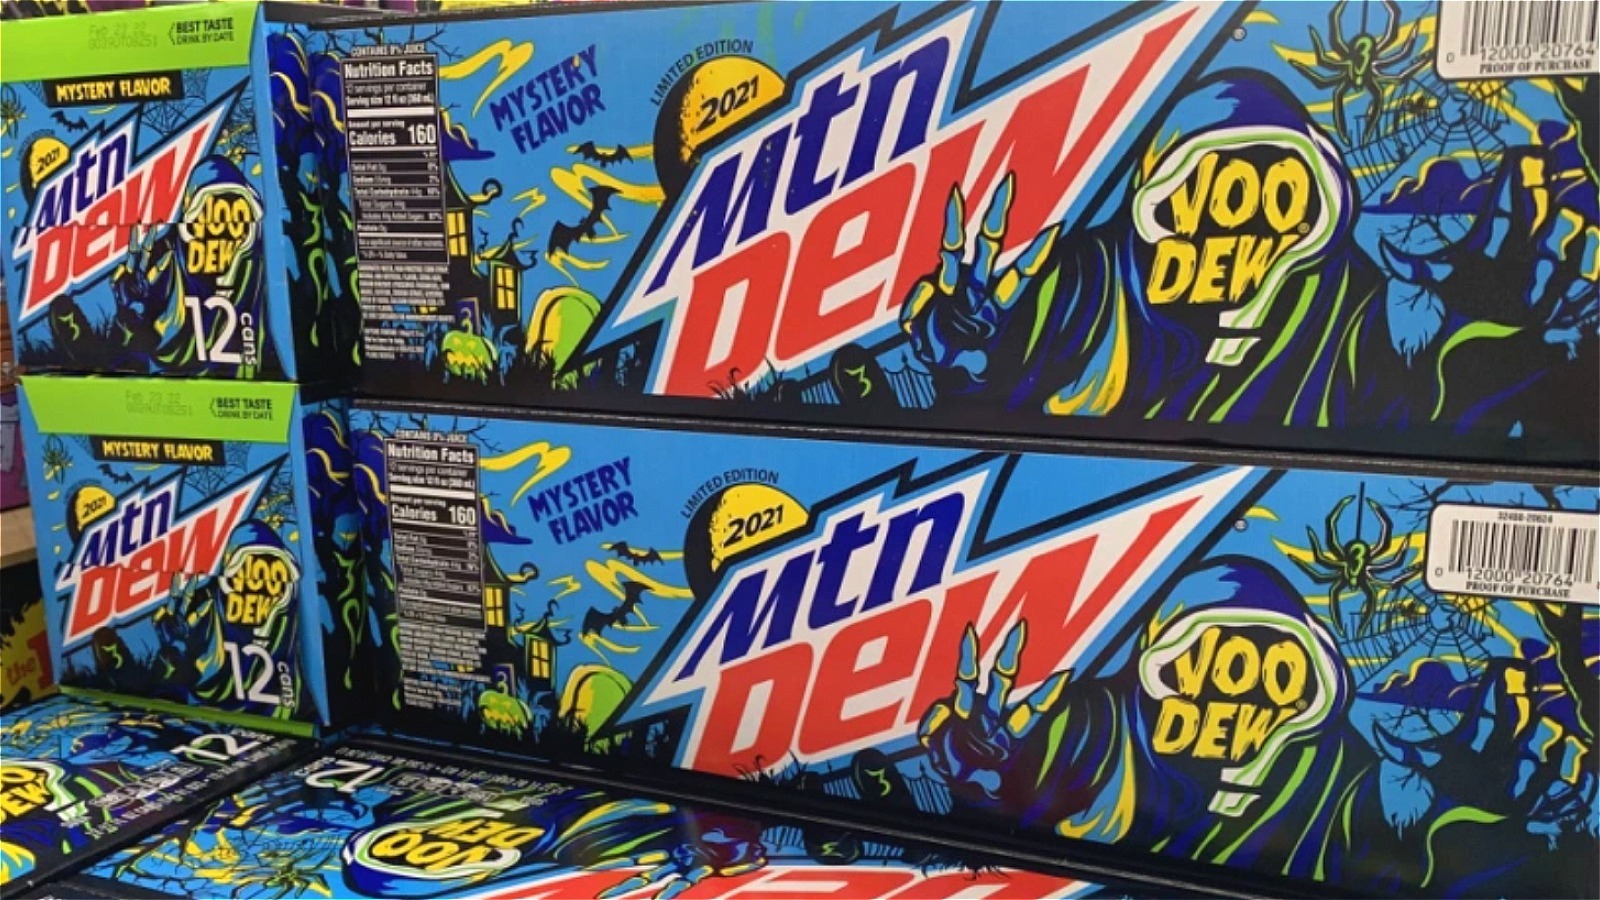 How Mountain Dew Fans Really Feel About Its 2021 VooDEW Mystery Flavor